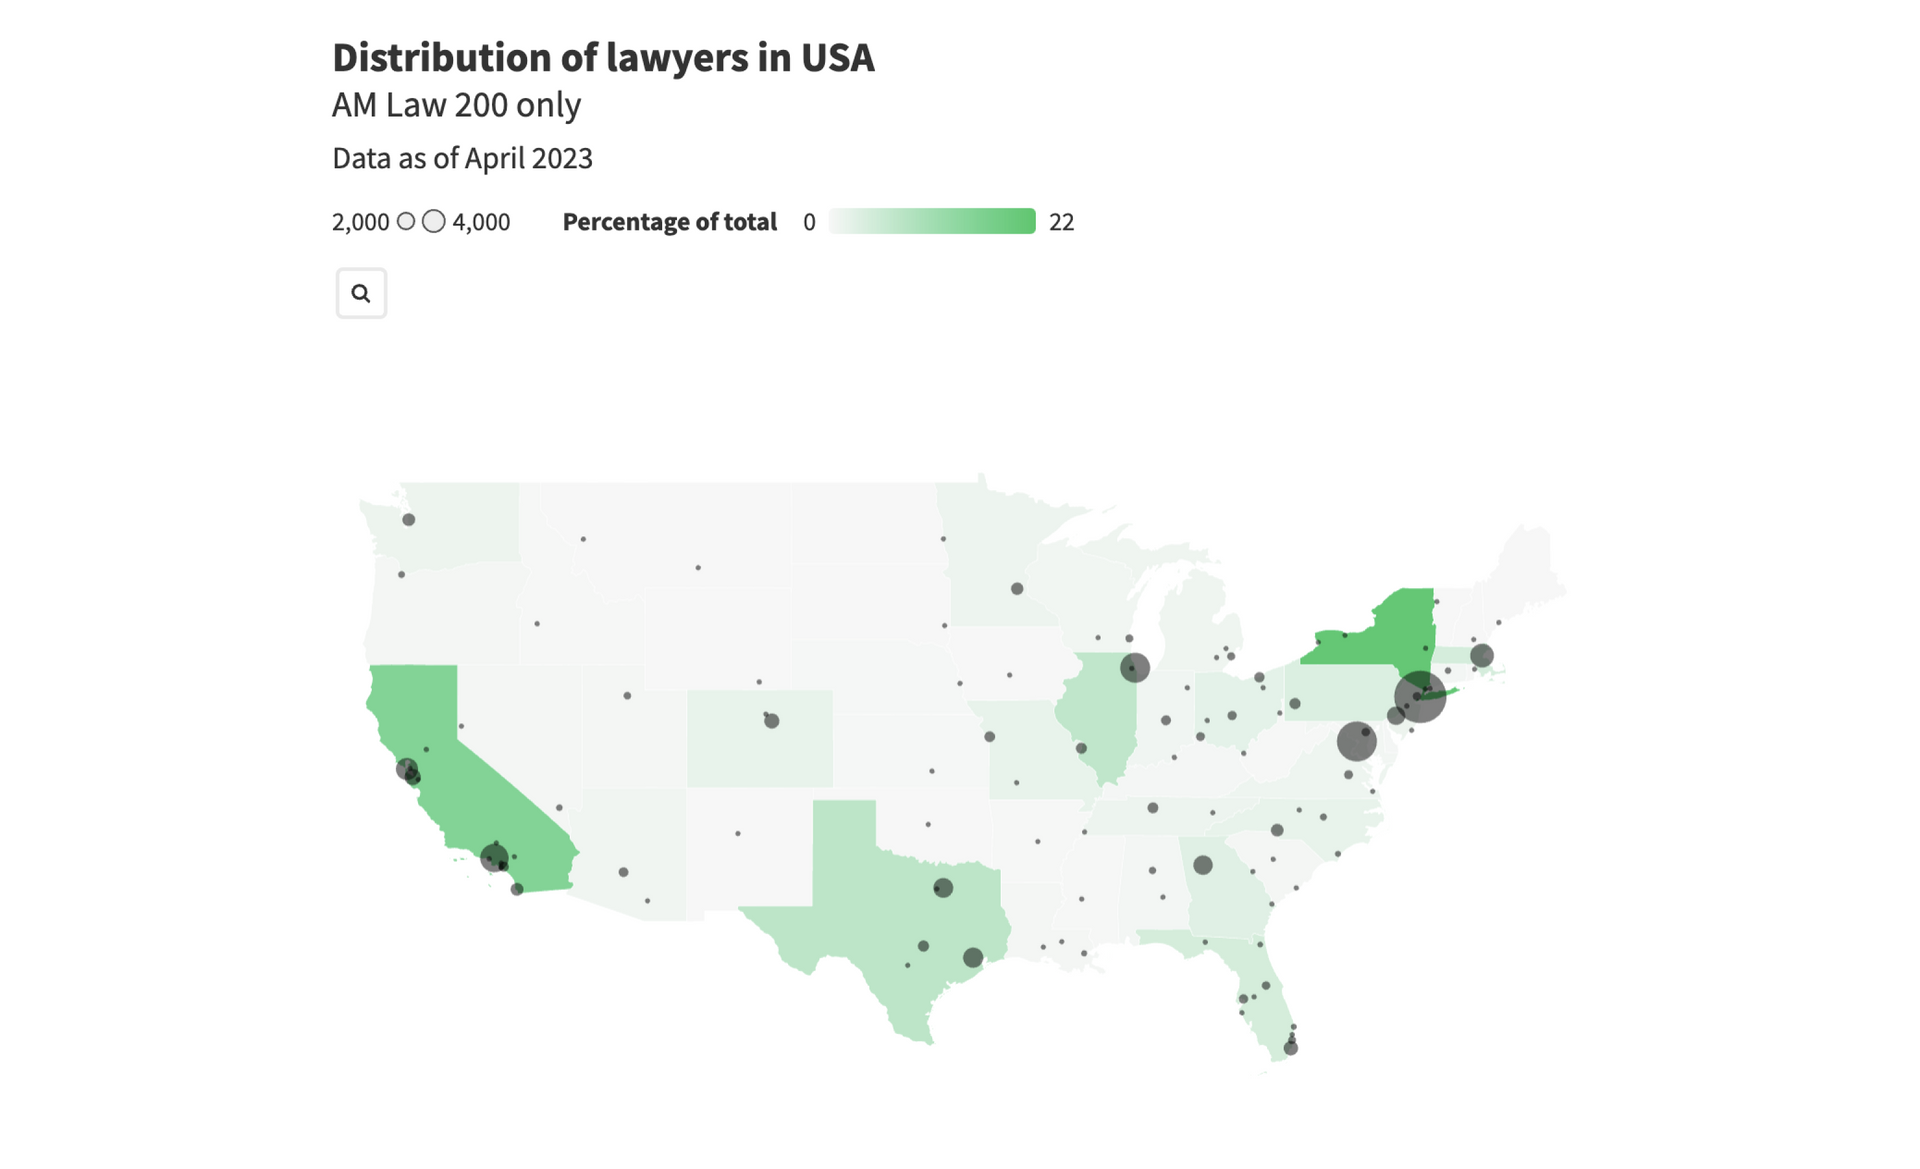 Where are the top attorneys in the USA located?